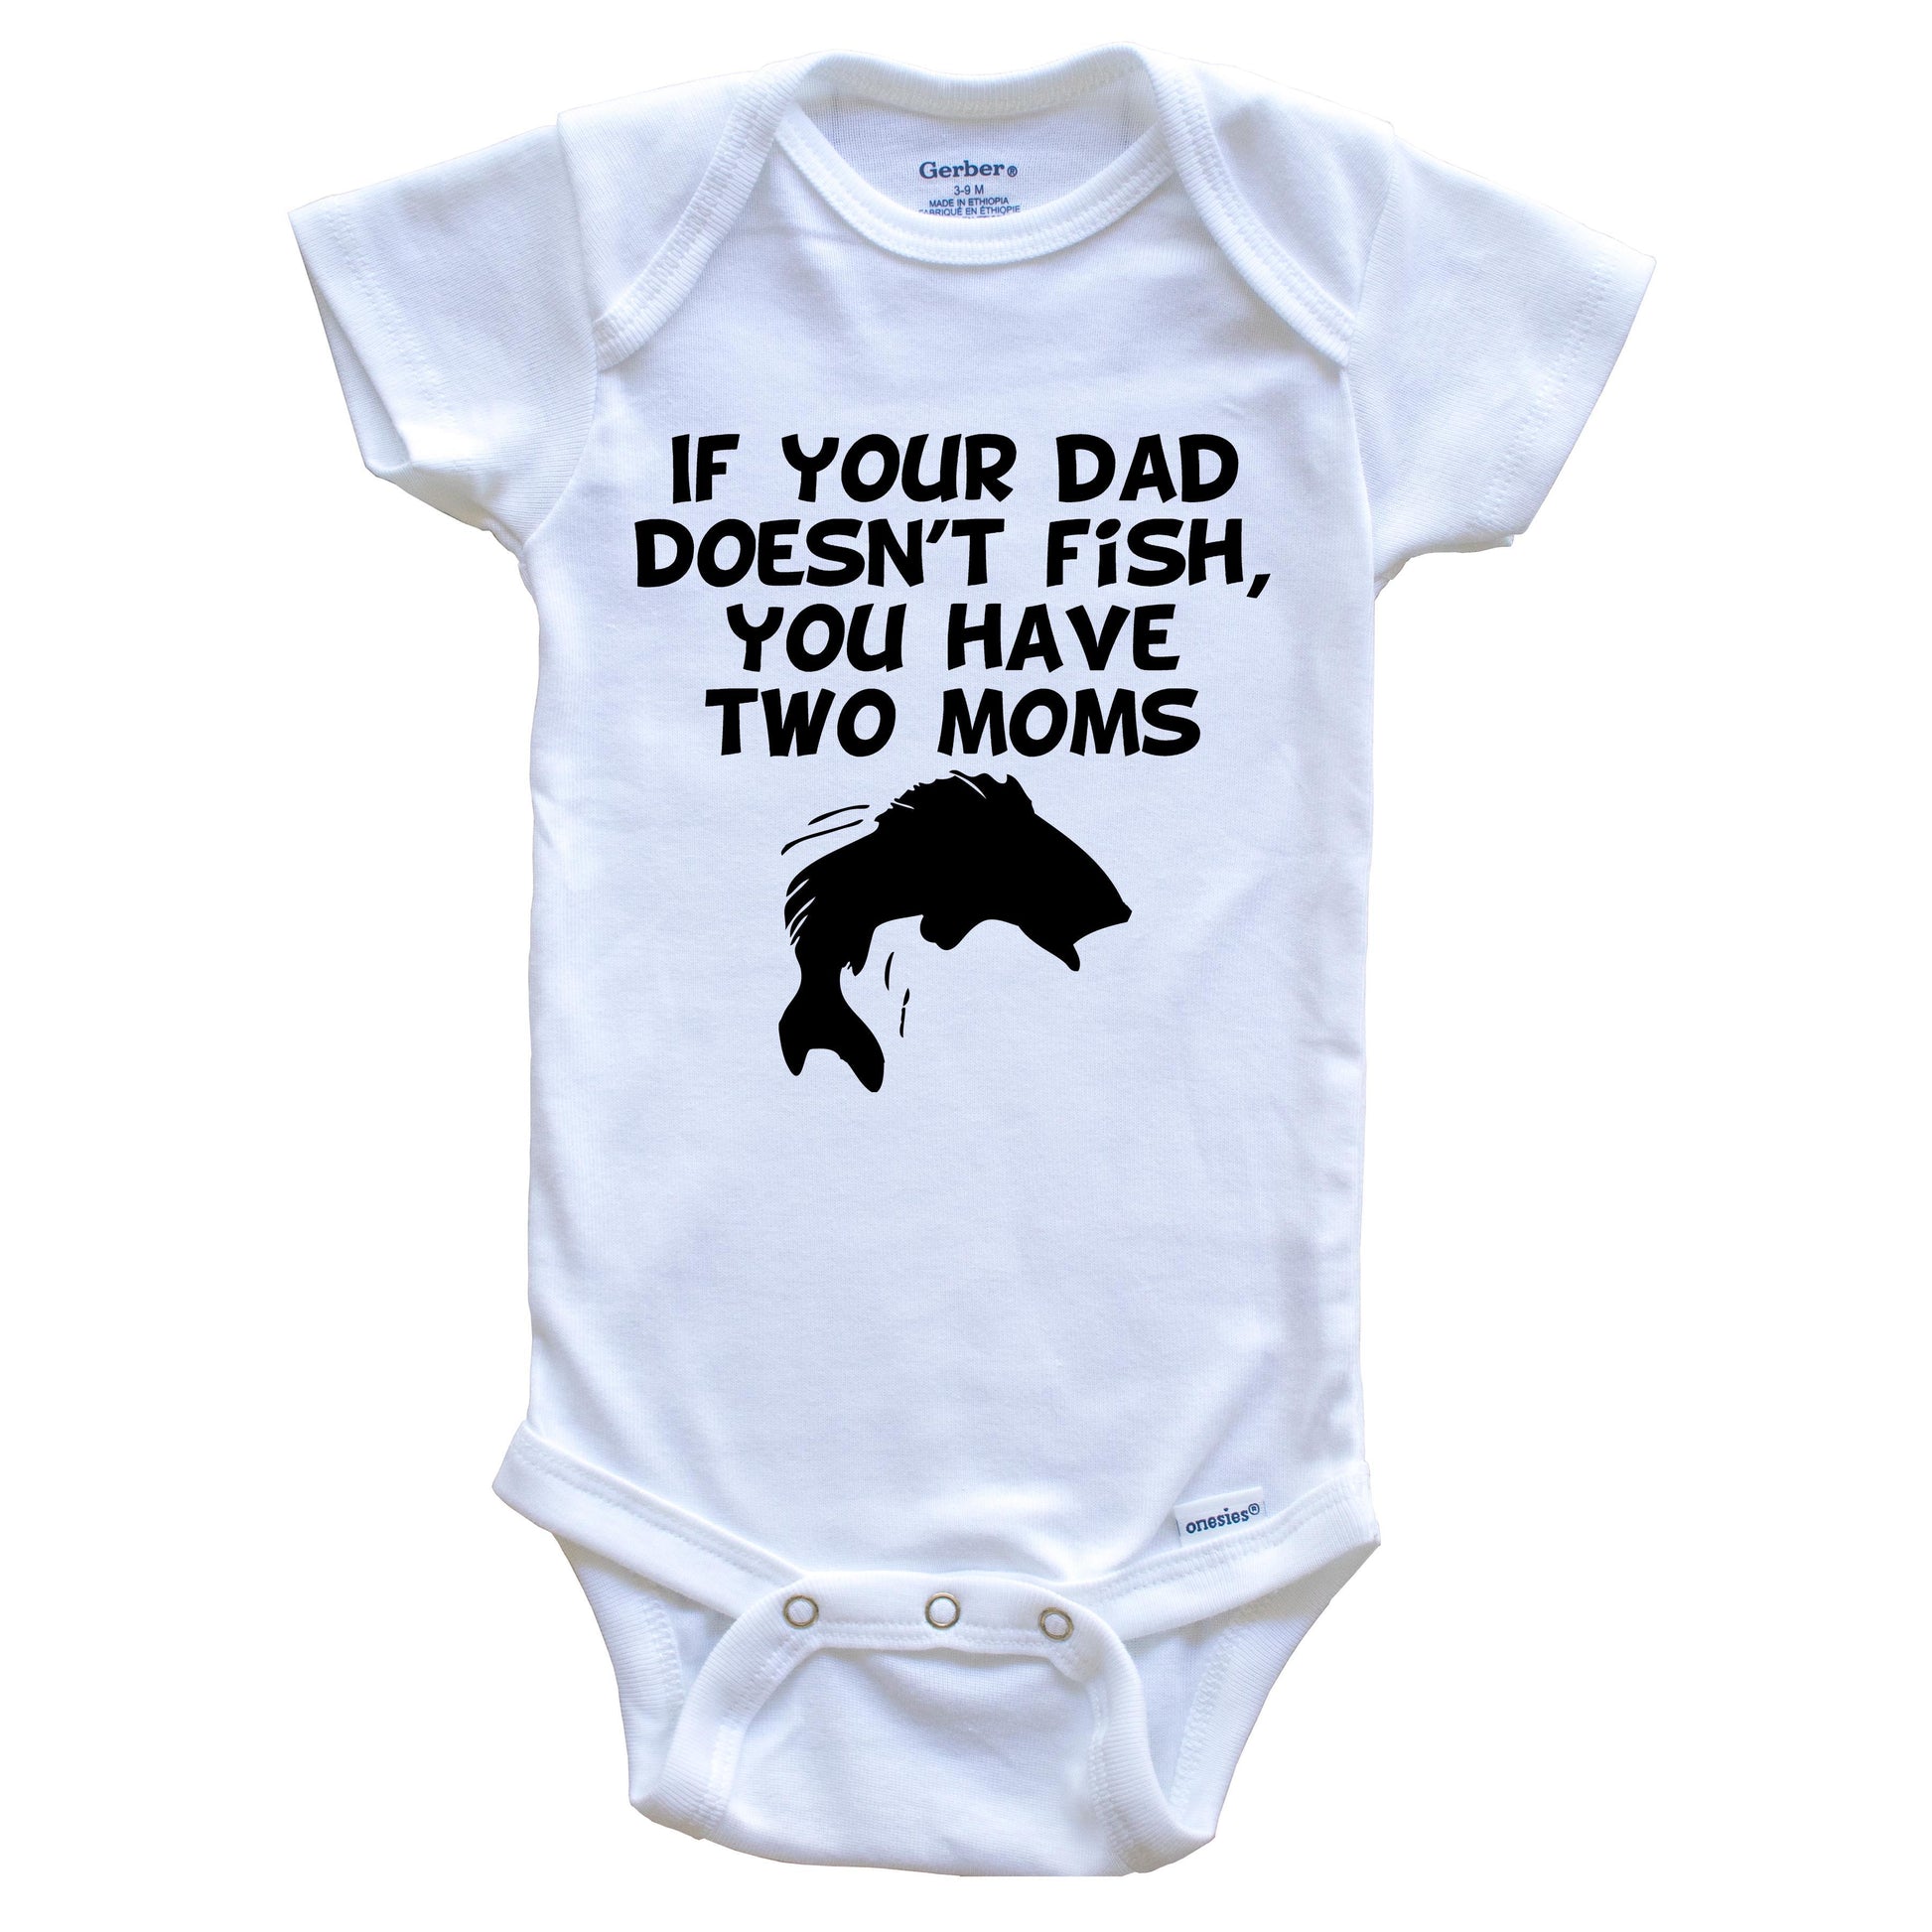 If Your Dad Doesn't Fish You Have Two Moms Funny Fishing Baby Onesie 24 Months / White